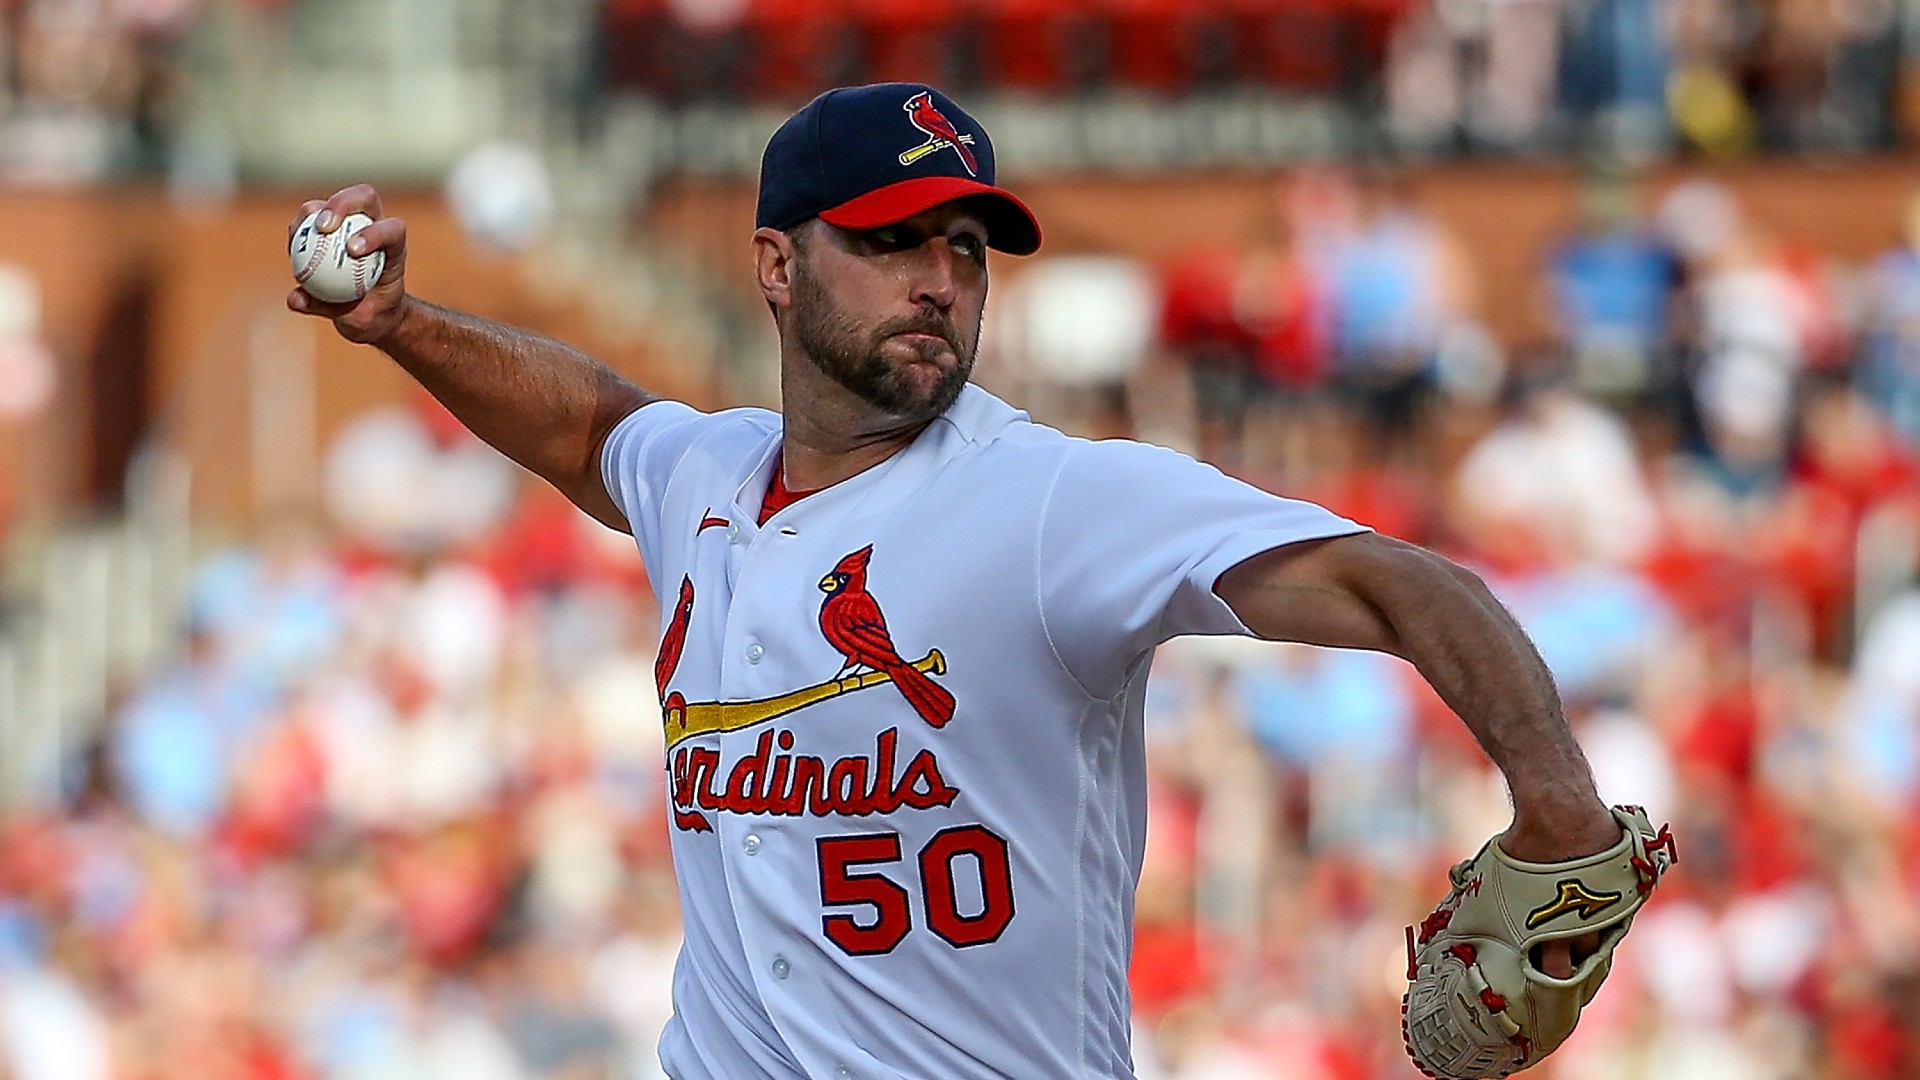 Yankees vs. Cardinals MLB Odds, Pick & Preview: Value on St. Louis as Road Underdogs? (Sunday, August 7) article feature image